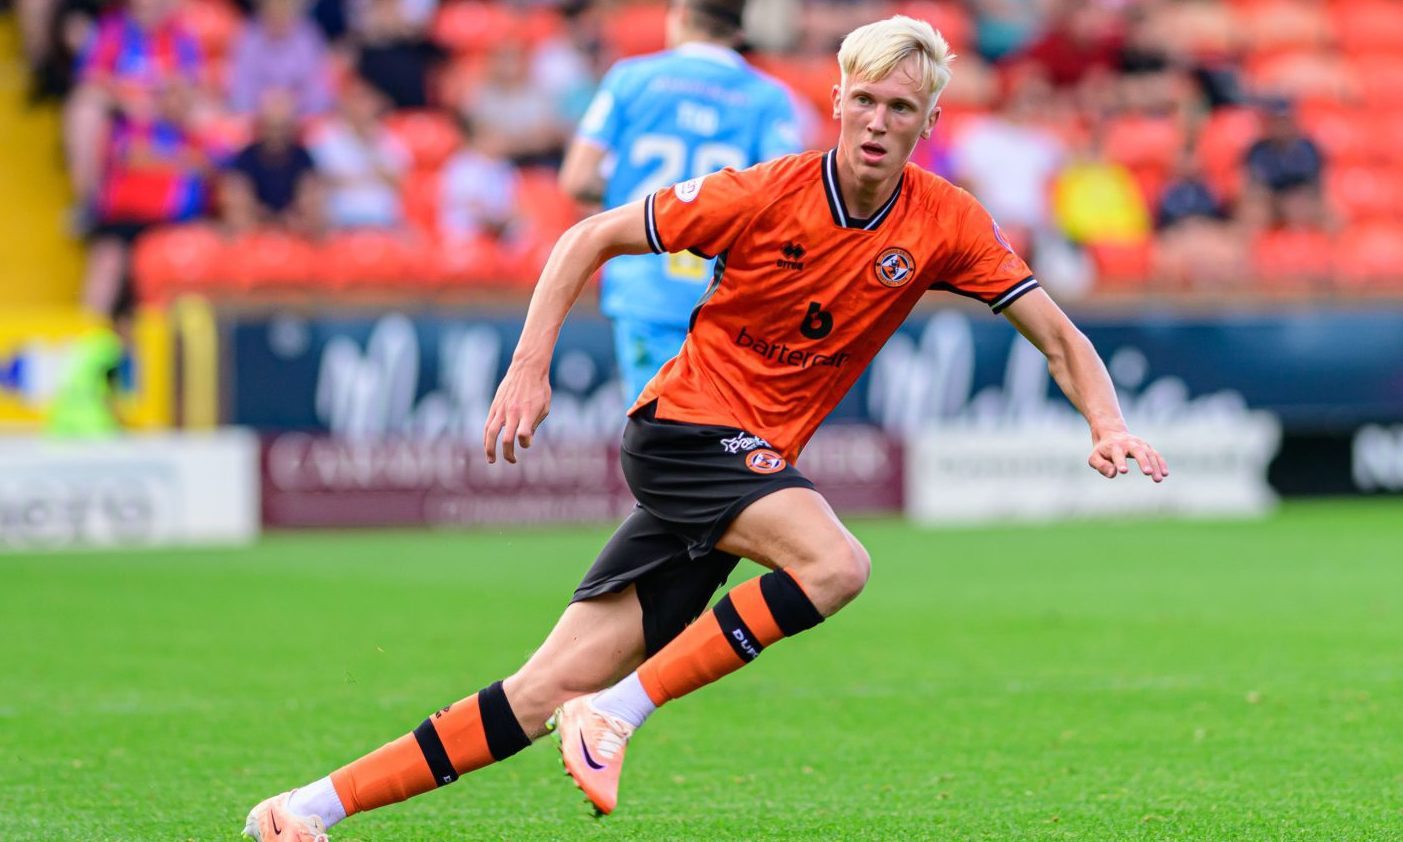 Owen Stirton in full flow for Dundee United